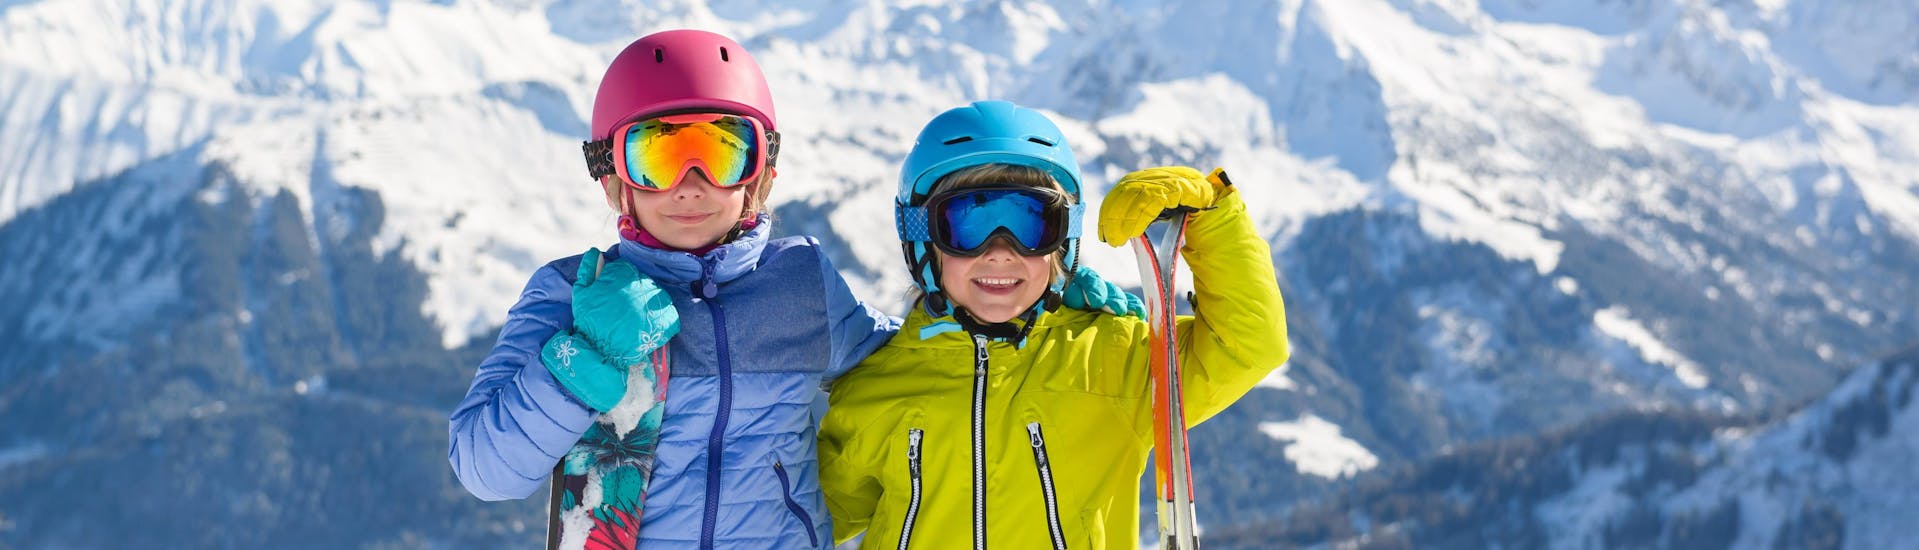 Two children in full skiing gear are smiling at the camera as they prepare for their kids ski lessons in Mondolé Ski.